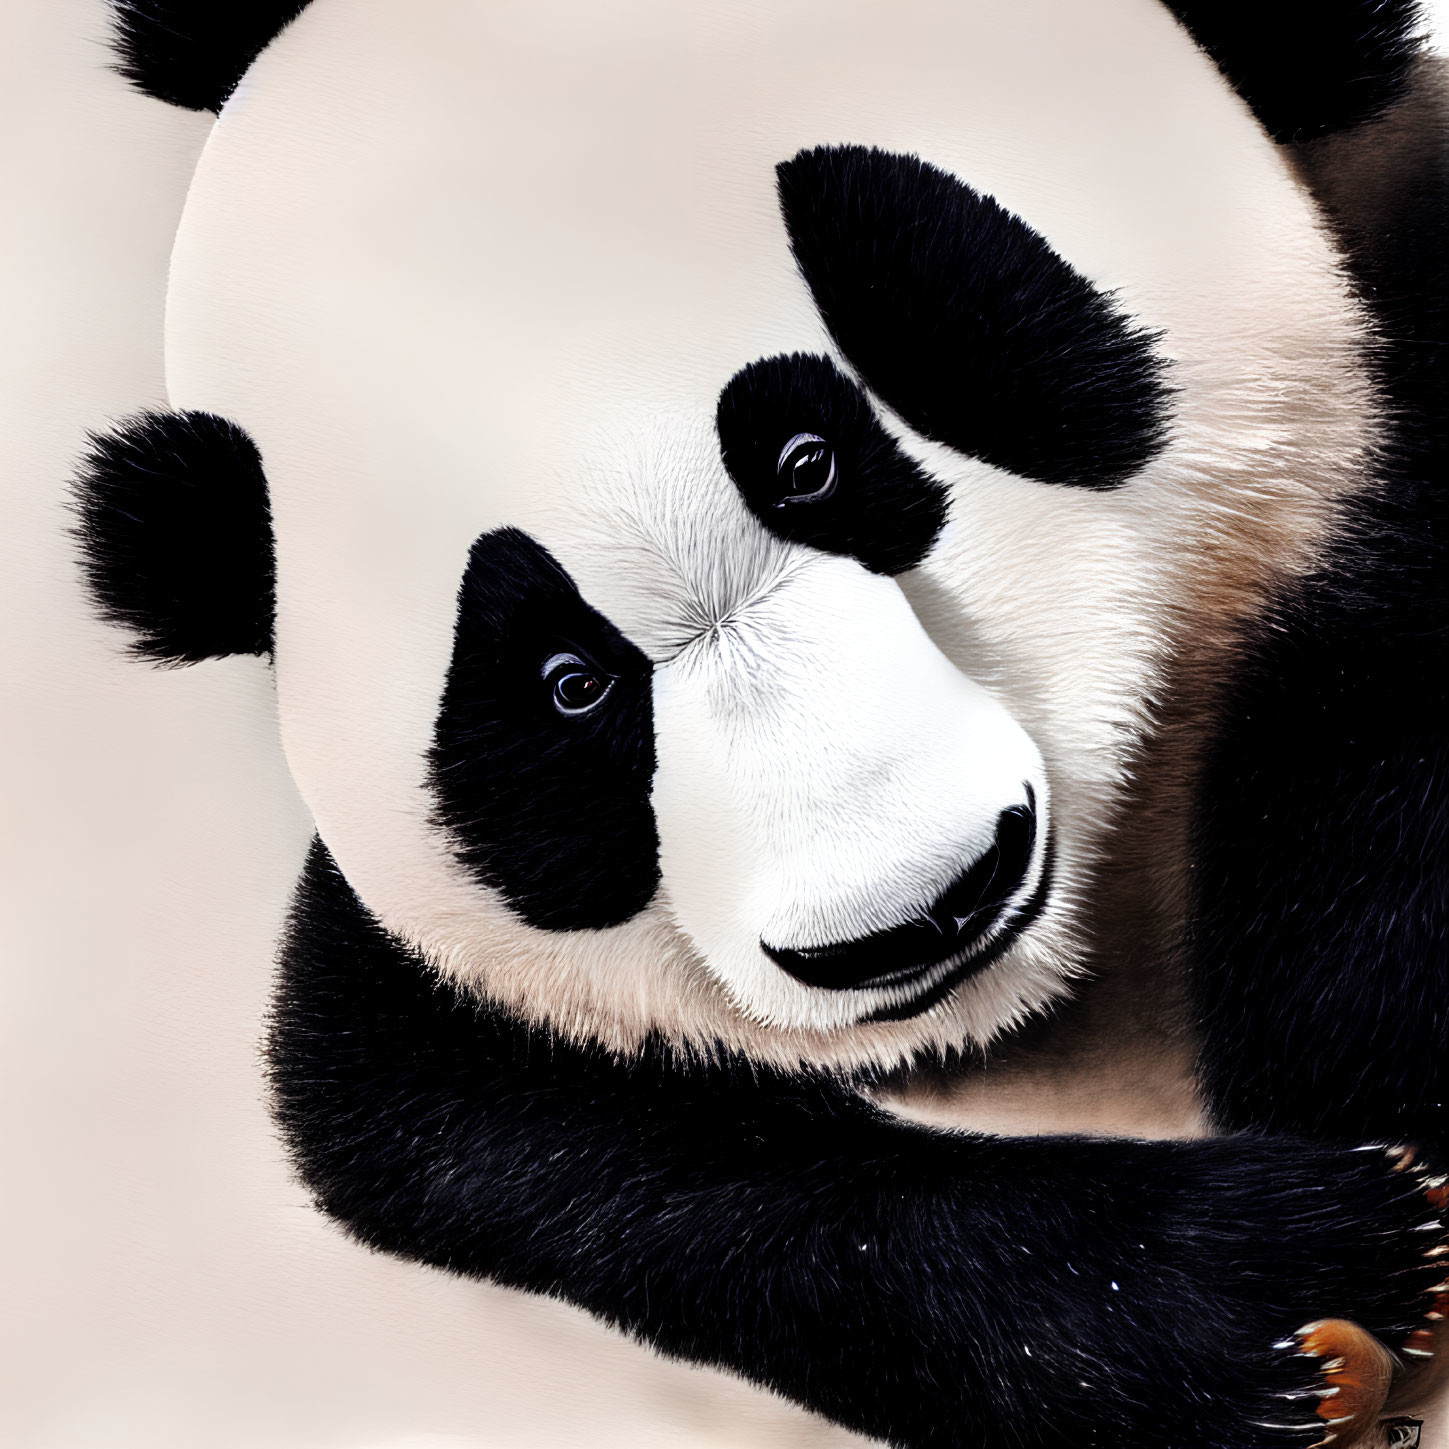 Detailed Close-Up of Giant Panda's Black and White Face